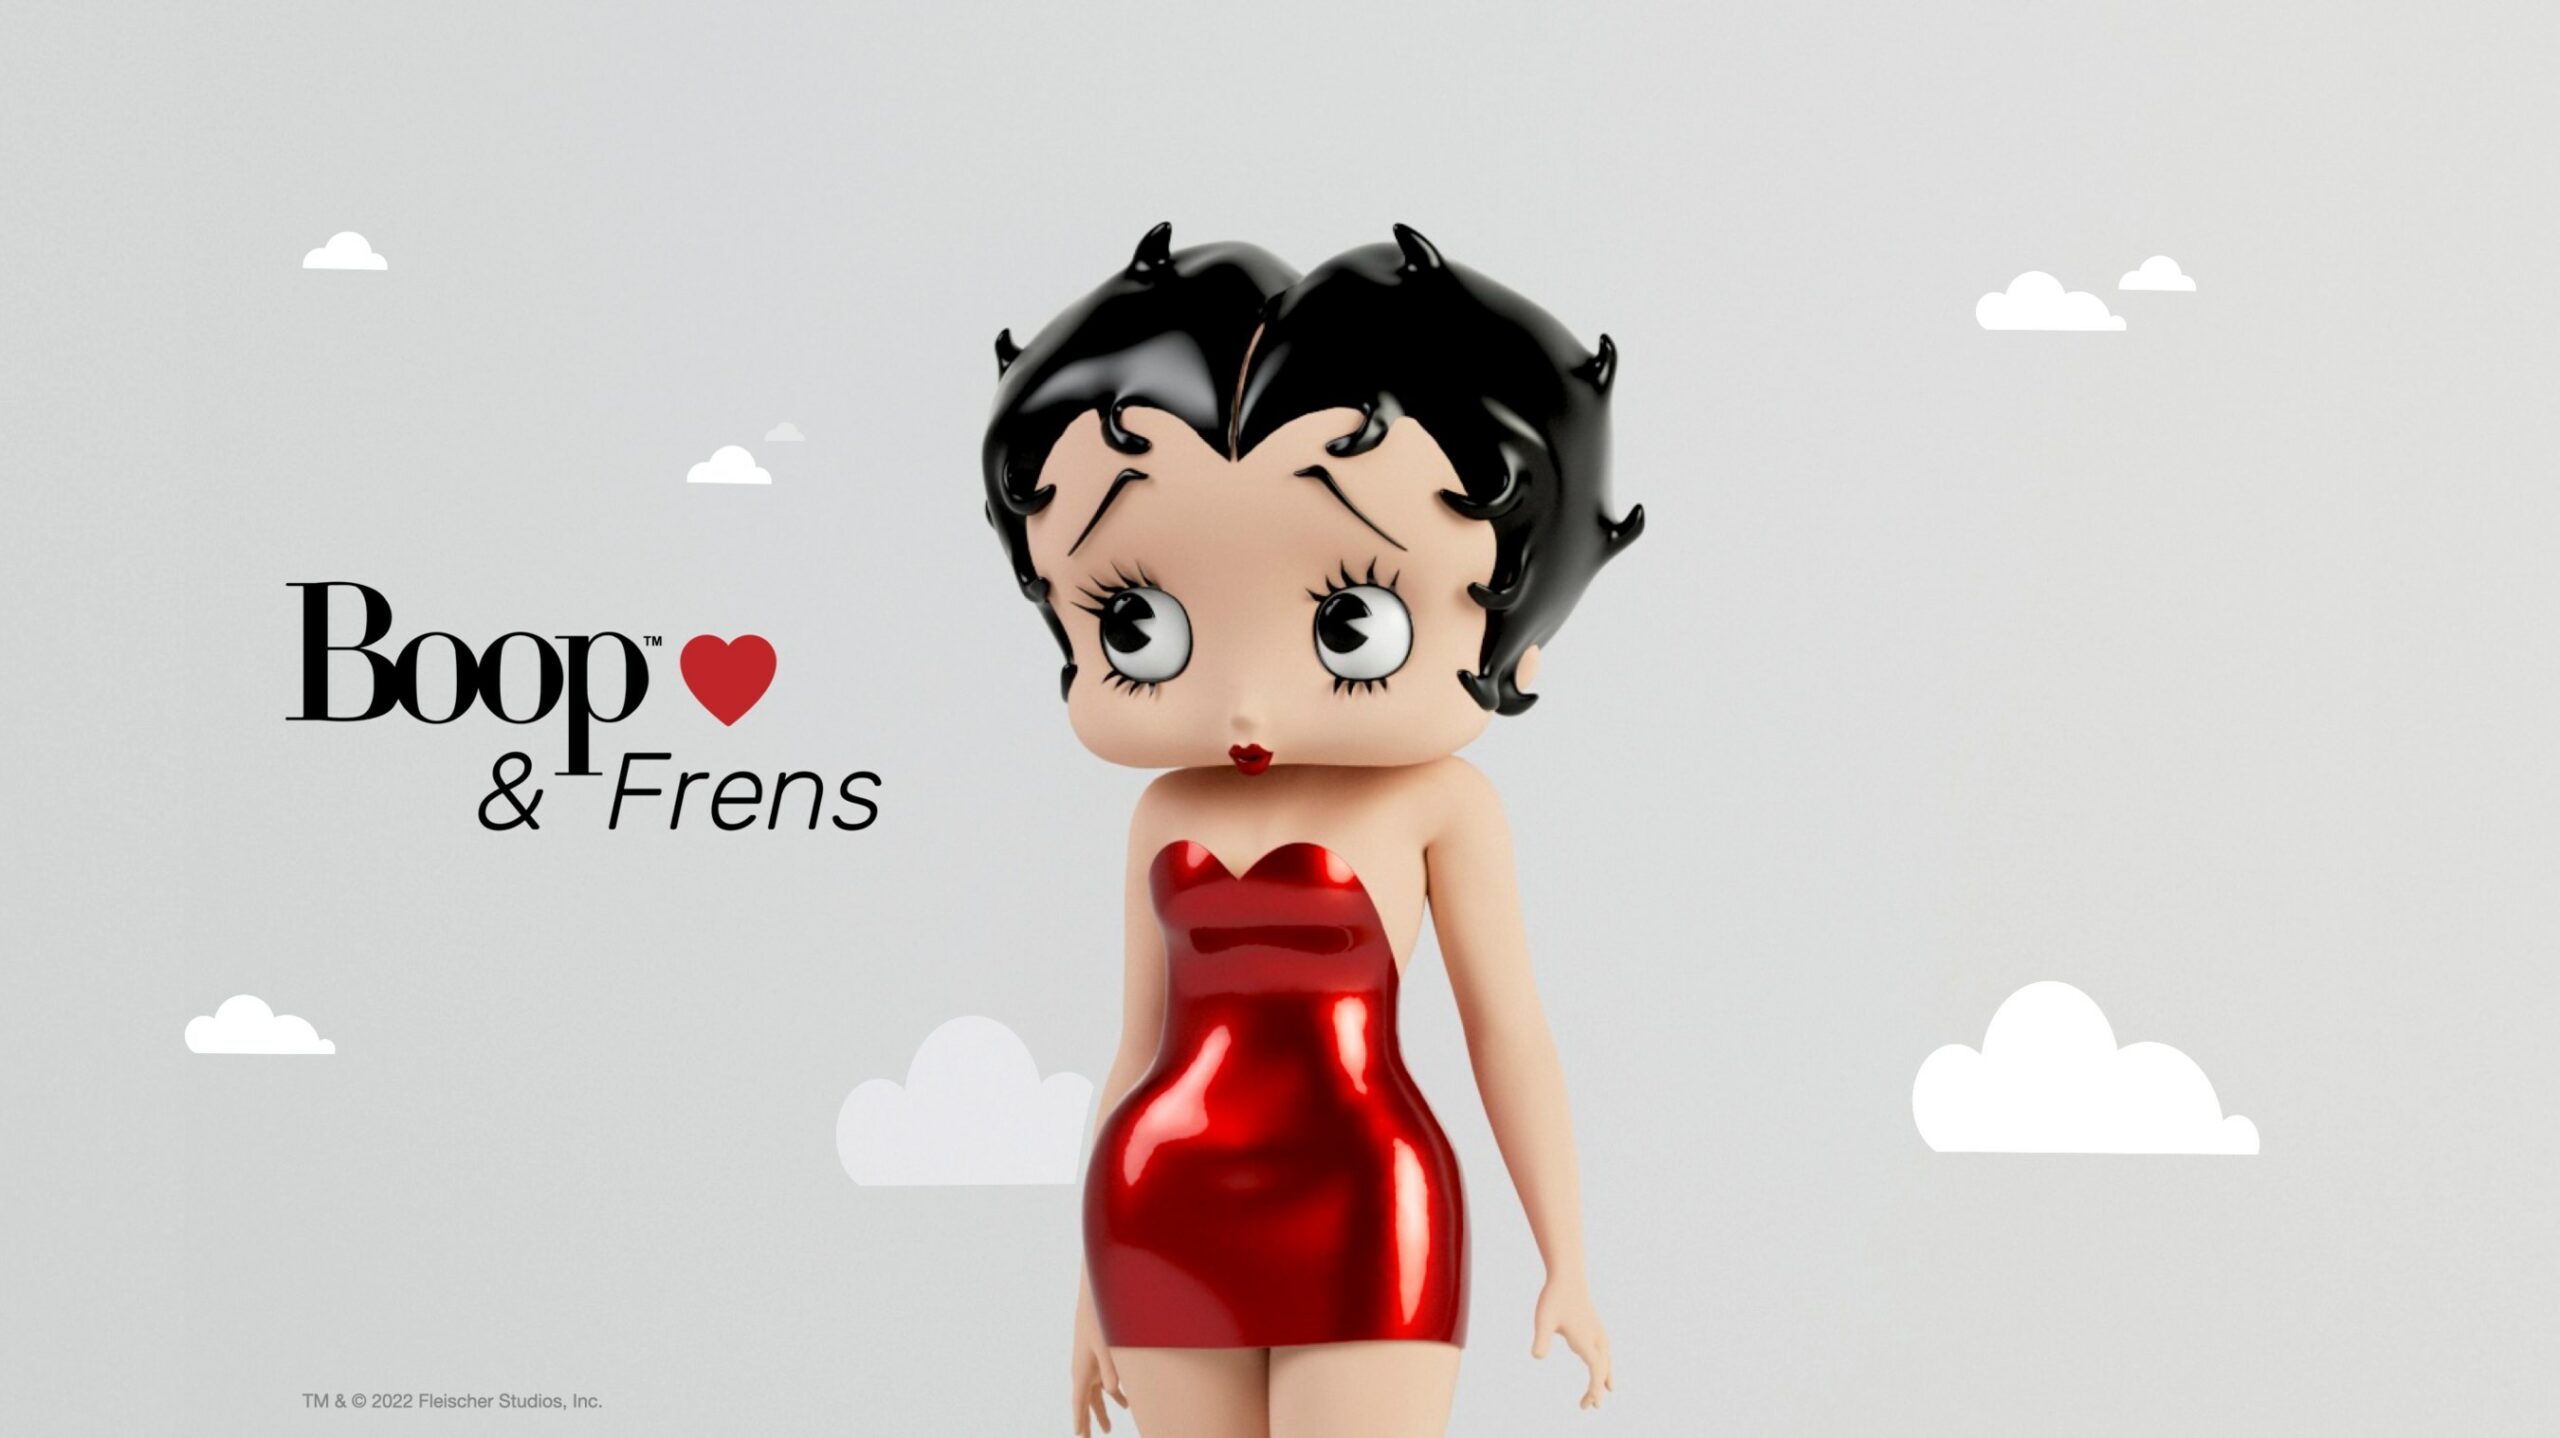 Betty Boop Launches ‘Boop & Frens’ NFTs